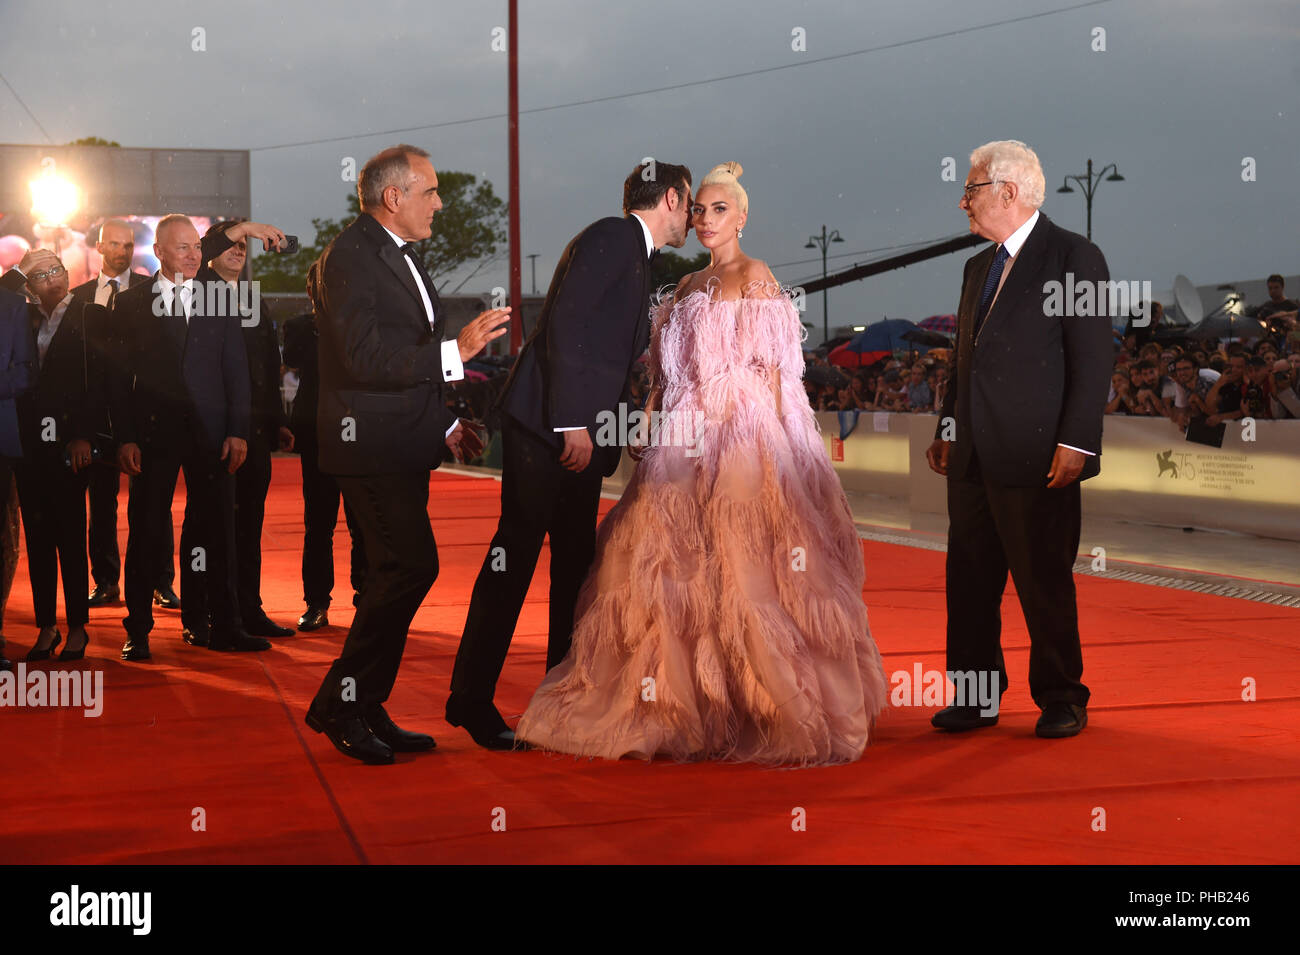 Venice, Italy. 31st Aug, 2018. The singer Lady Gaga and the actor and director Bradley Cooper (3-R) cross the red carpet at the world premiere of the film musical "A Star is Born" at the Venice Film Festival (other characters not identified). The film festival runs from 29 August to 8 September and is taking place for the 75th time this year. Credit: Felix Hörhager/dpa/Alamy Live News Stock Photo